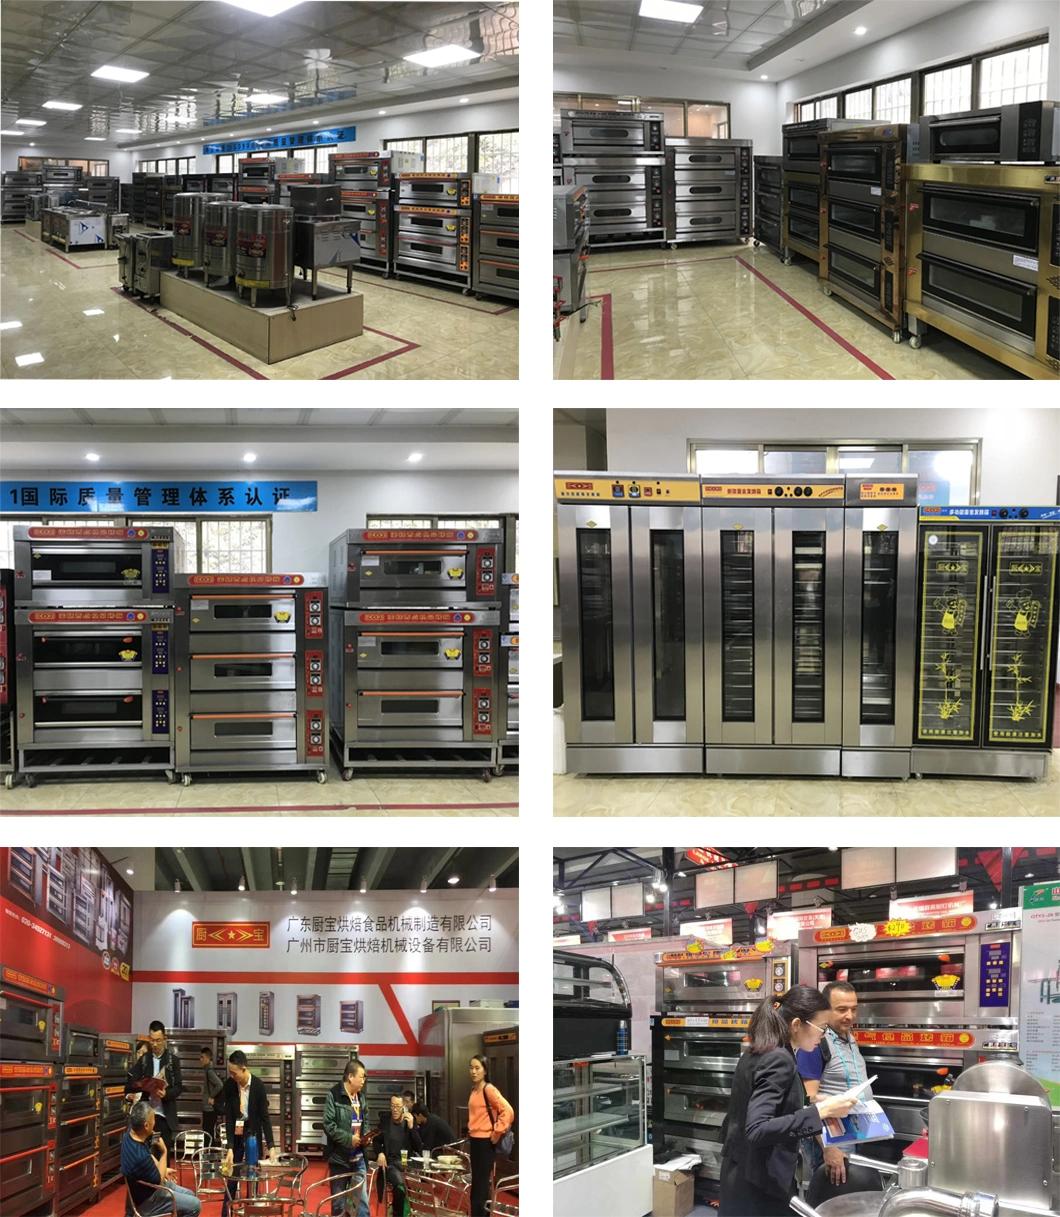 Commercial Restaurant Kitchen 1 Deck 2 Trays Gas Oven for Baking Equipment Bakery Machine Food Equipment with Computer Controller Bread Oven